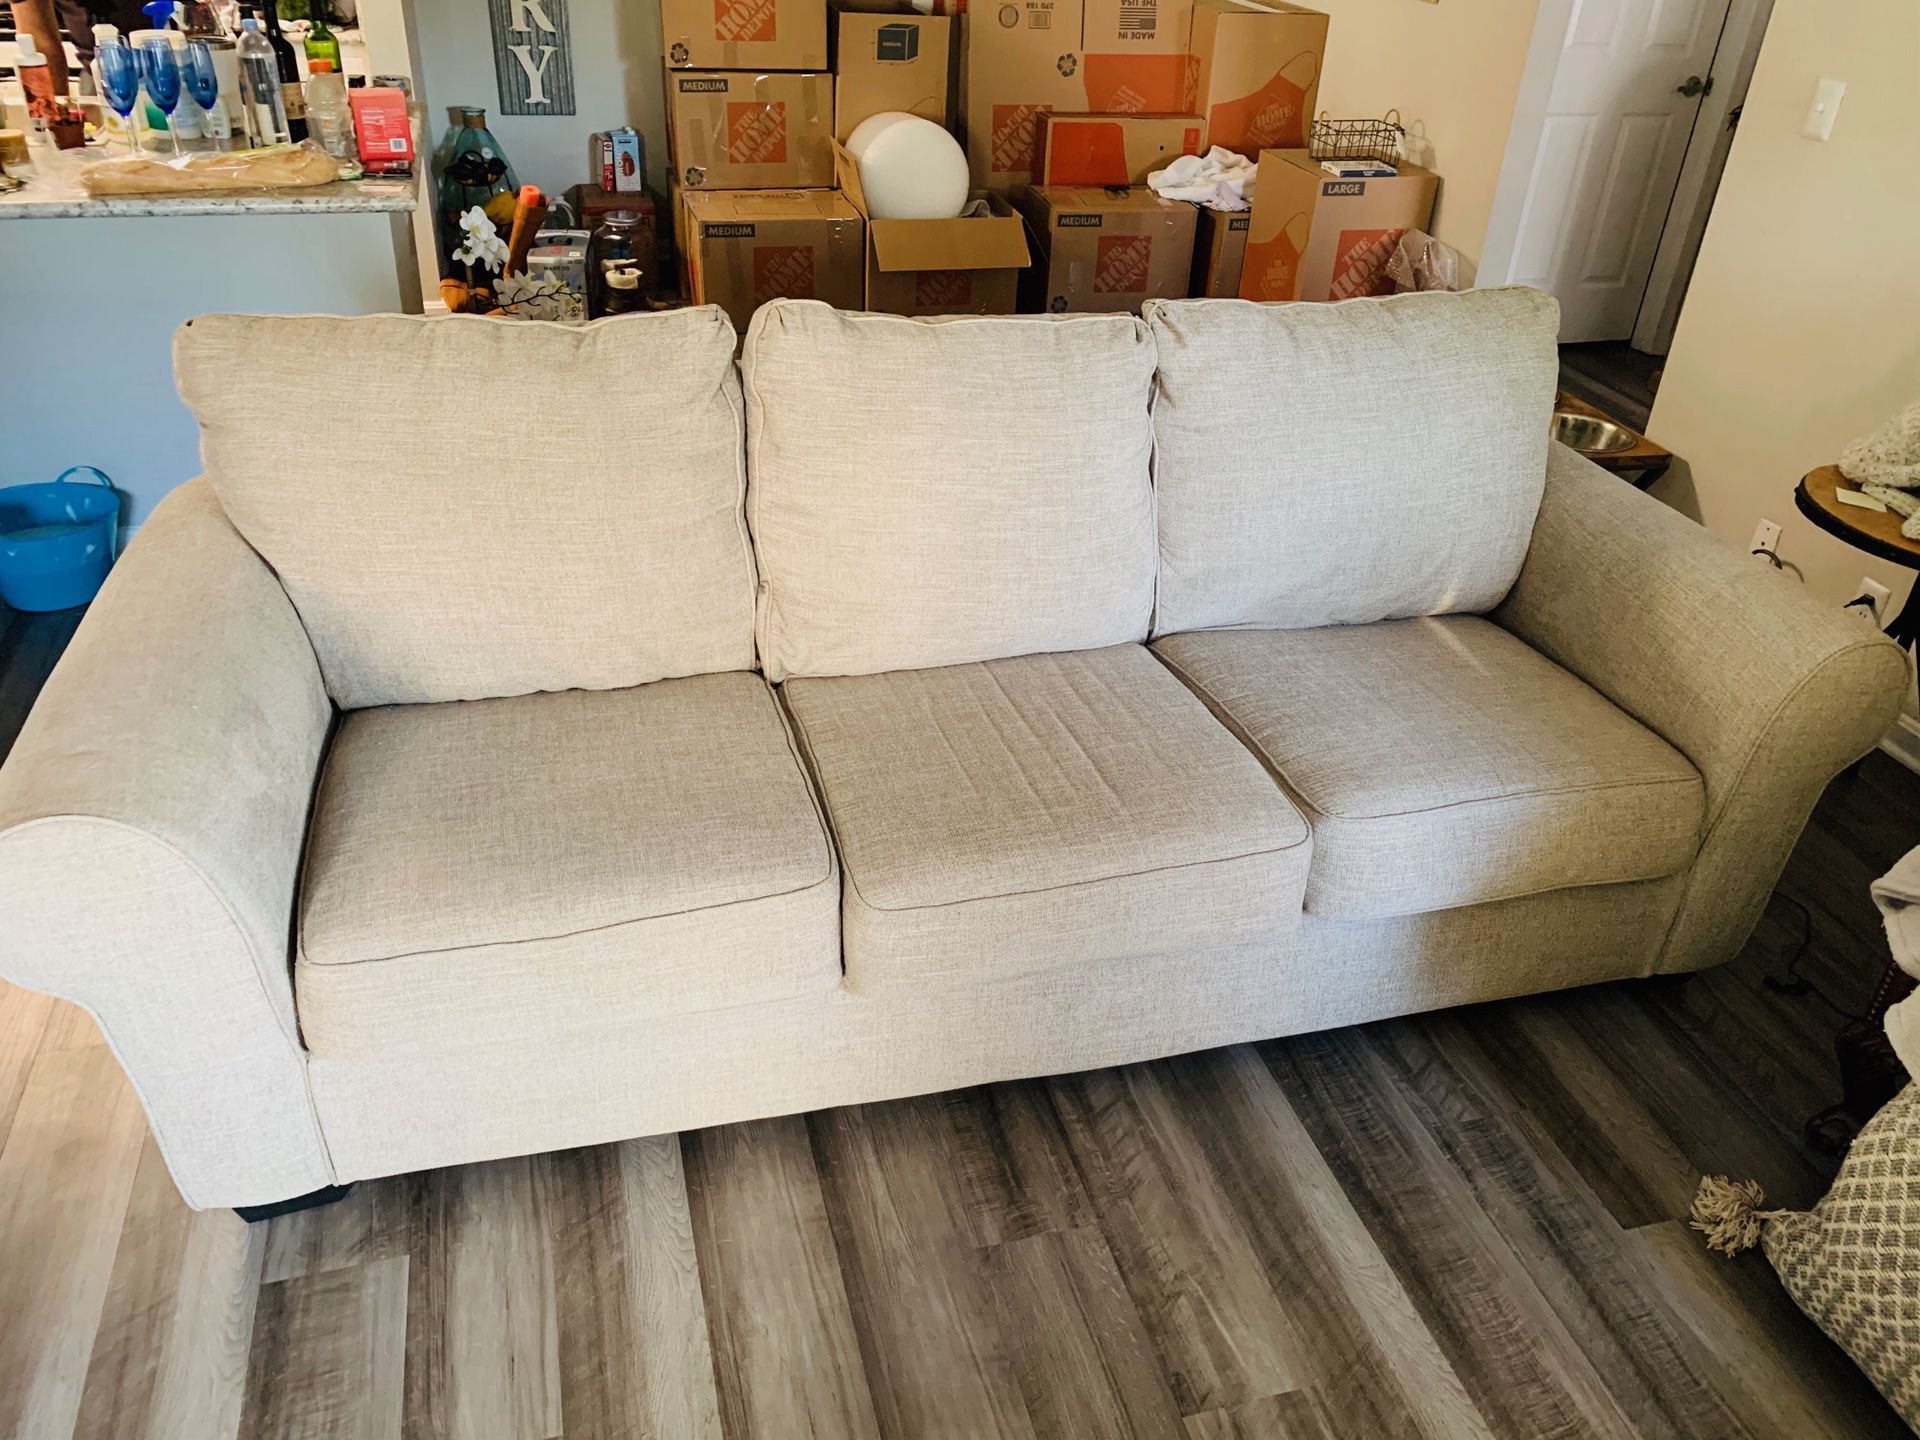 Ashley Furniture 9’ three seater couch great conditon